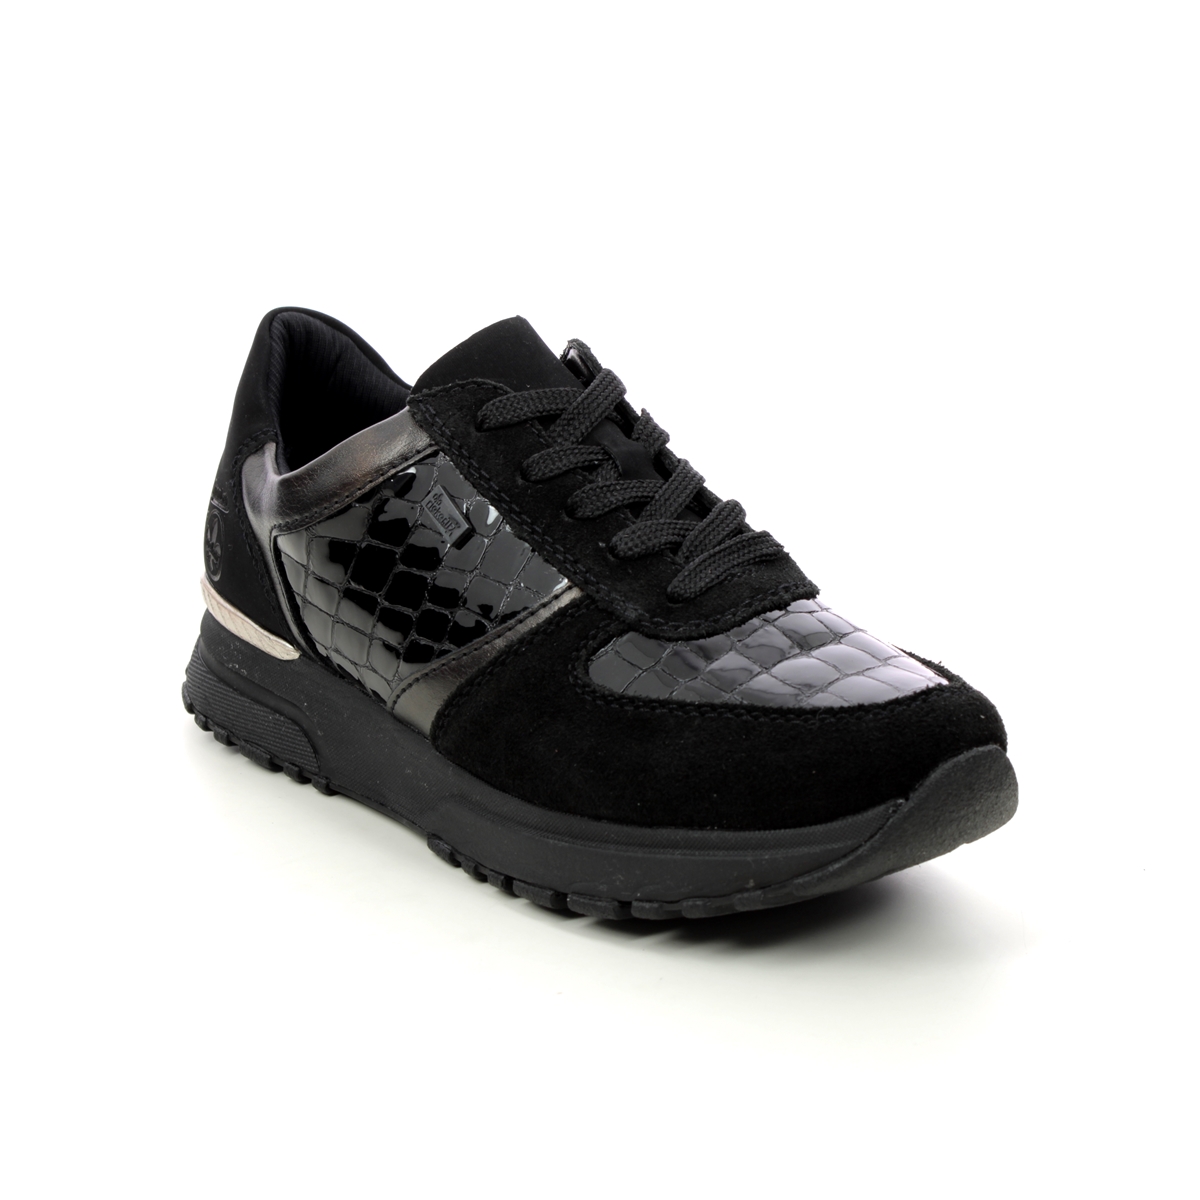 Rieker Govicroc Effect Black Patent Suede Womens Trainers N7412-00 In Size 38 In Plain Black Patent Suede